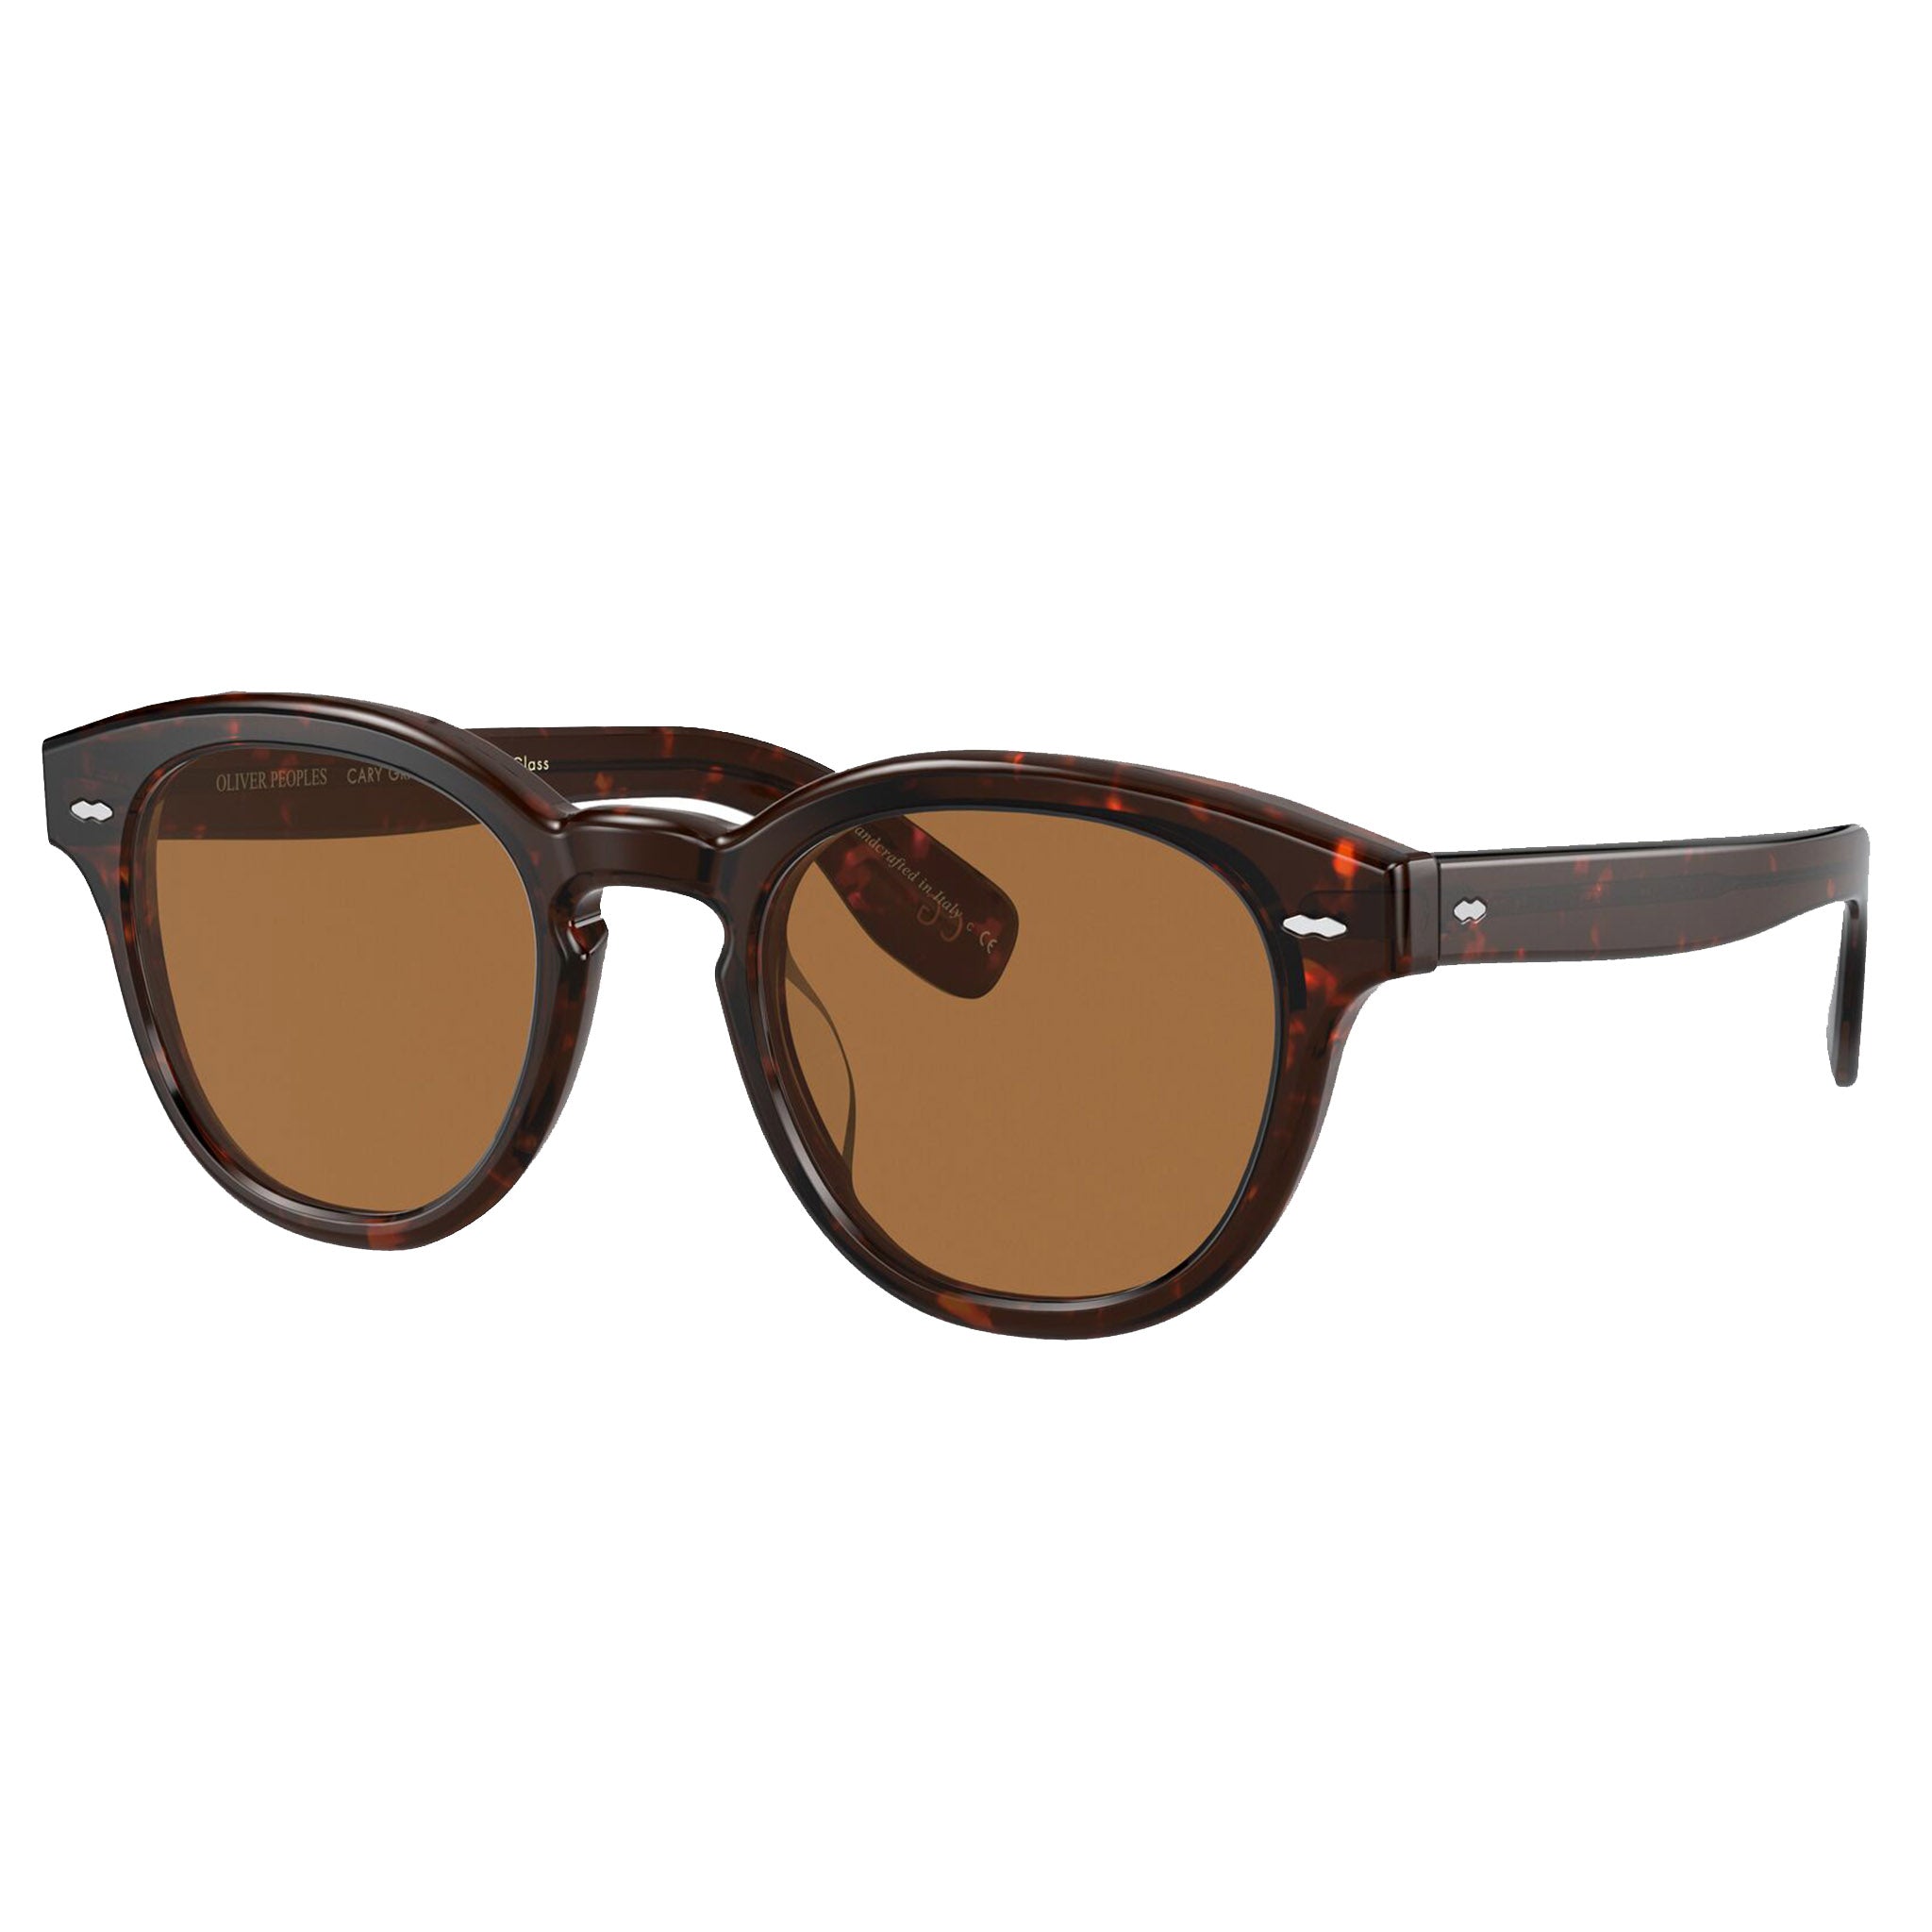 Oliver Peoples Cary Grant Sun DM2 Brown Sunglass